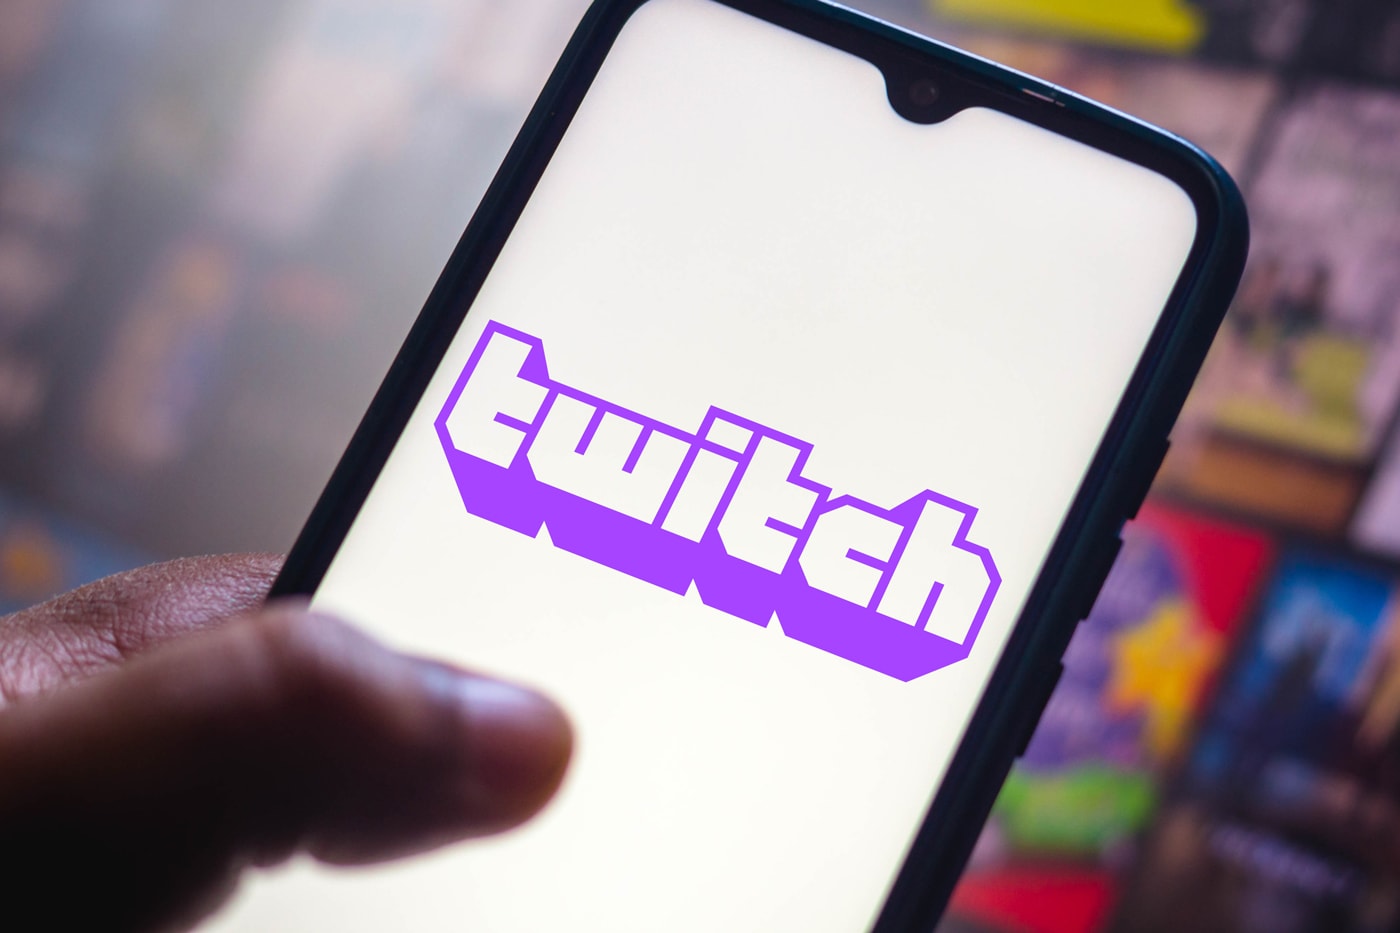 Twitch apologizes over new advertising rules rewrite new policy 3 percent logo size rule controversy news